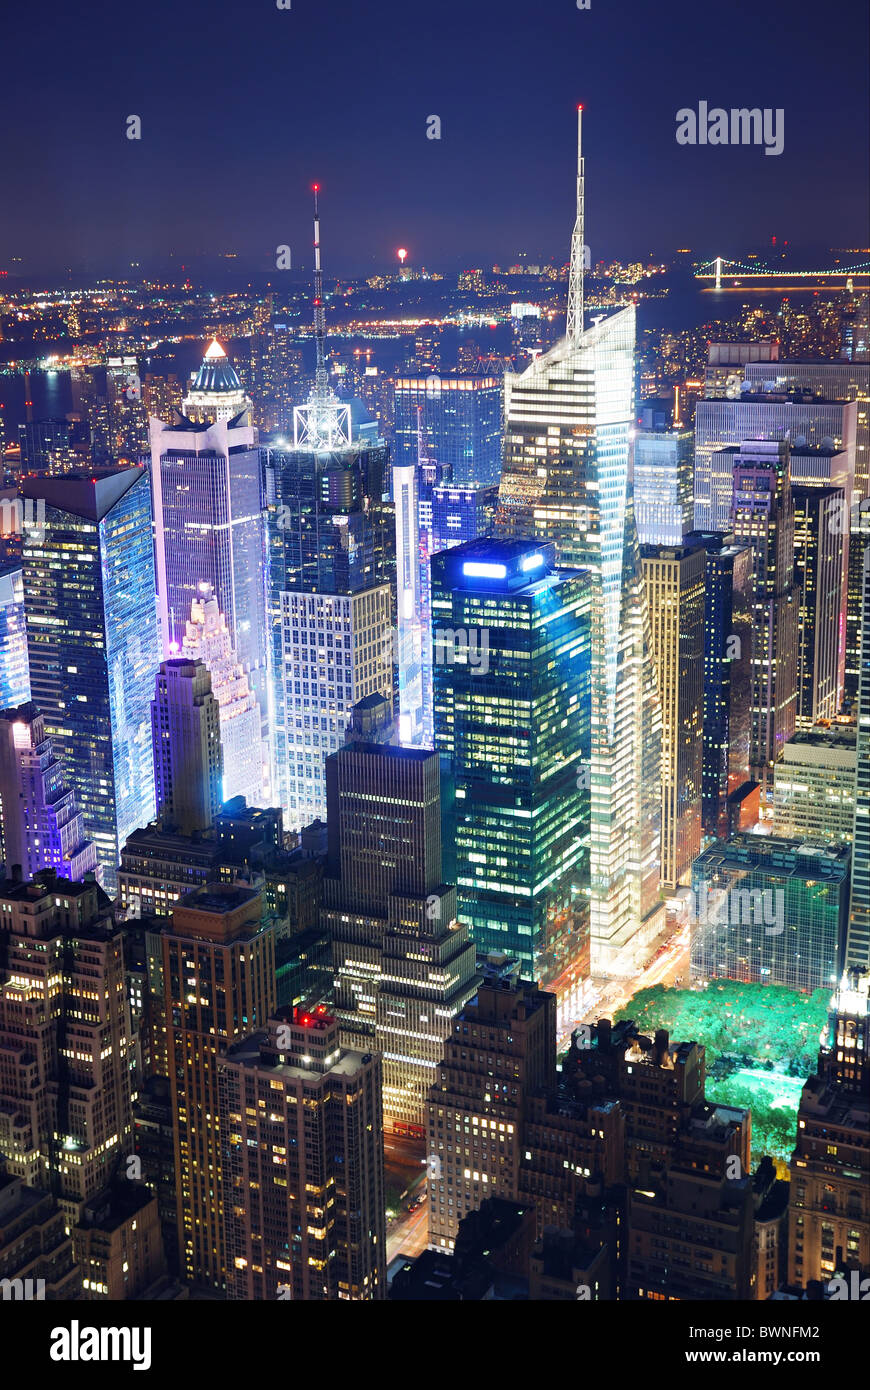 New York City Manhattan Times Square panorama aerial view at night with office building skyscrapers skyline illuminated Stock Photo